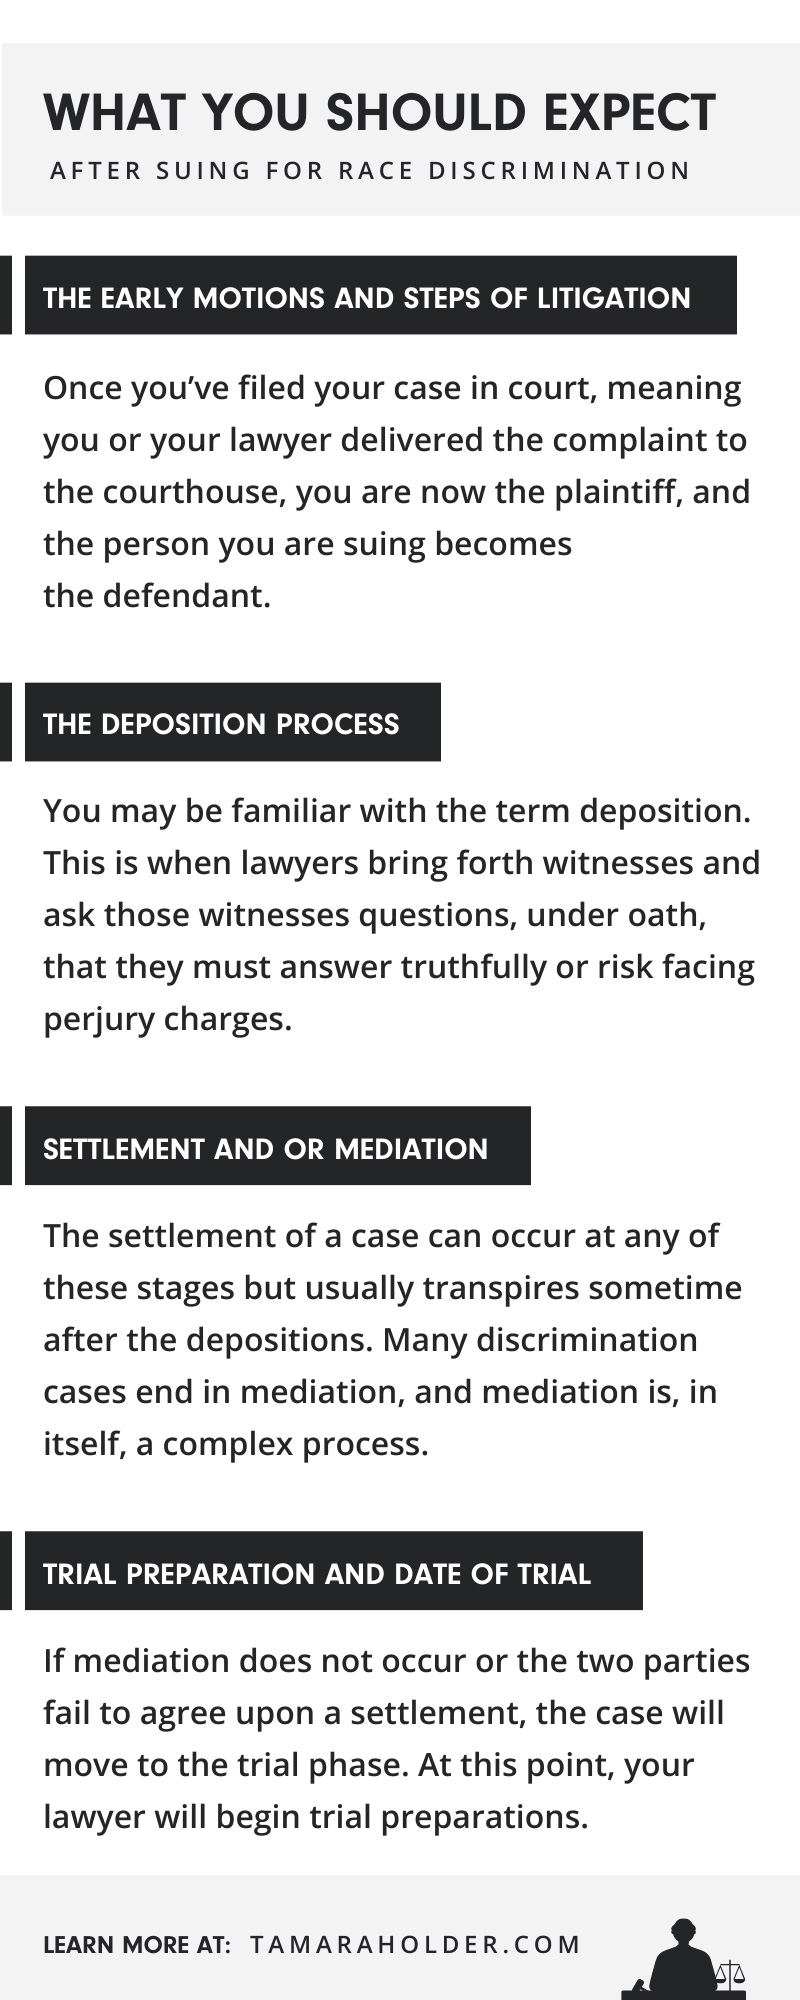 What You Should Expect After Suing For Race Discrimination